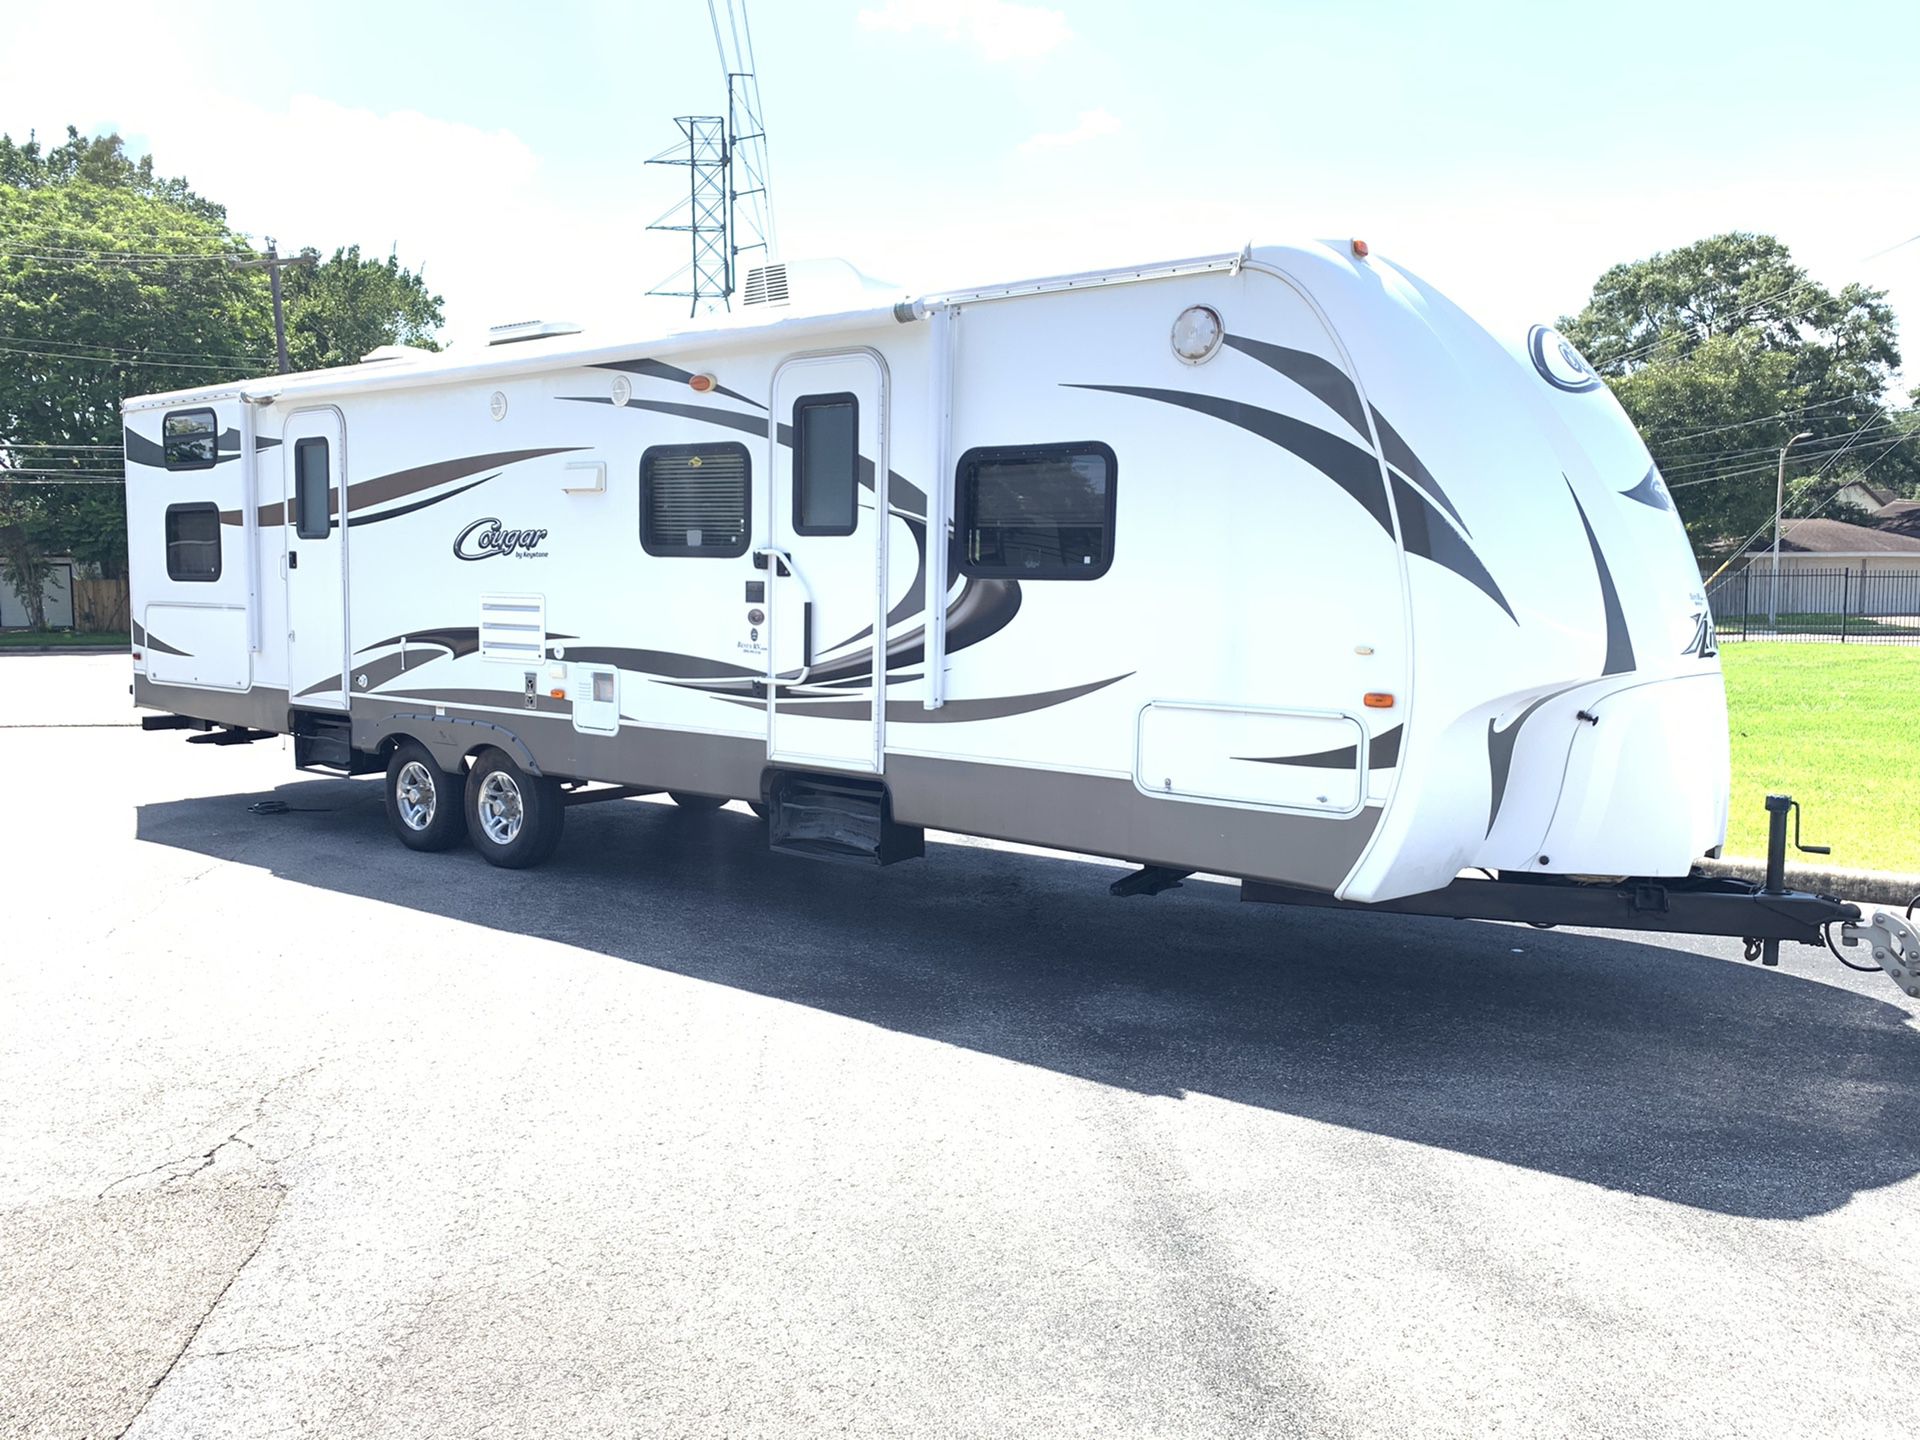 2012 Cougar X-Lite Series 31SQB. 35FT 2 Slide Outs Sleep 11 2 bedroom Lite Weight Travel Trailer w/Rear Bunkhouse, Club Couch w/Bunk Above, Set